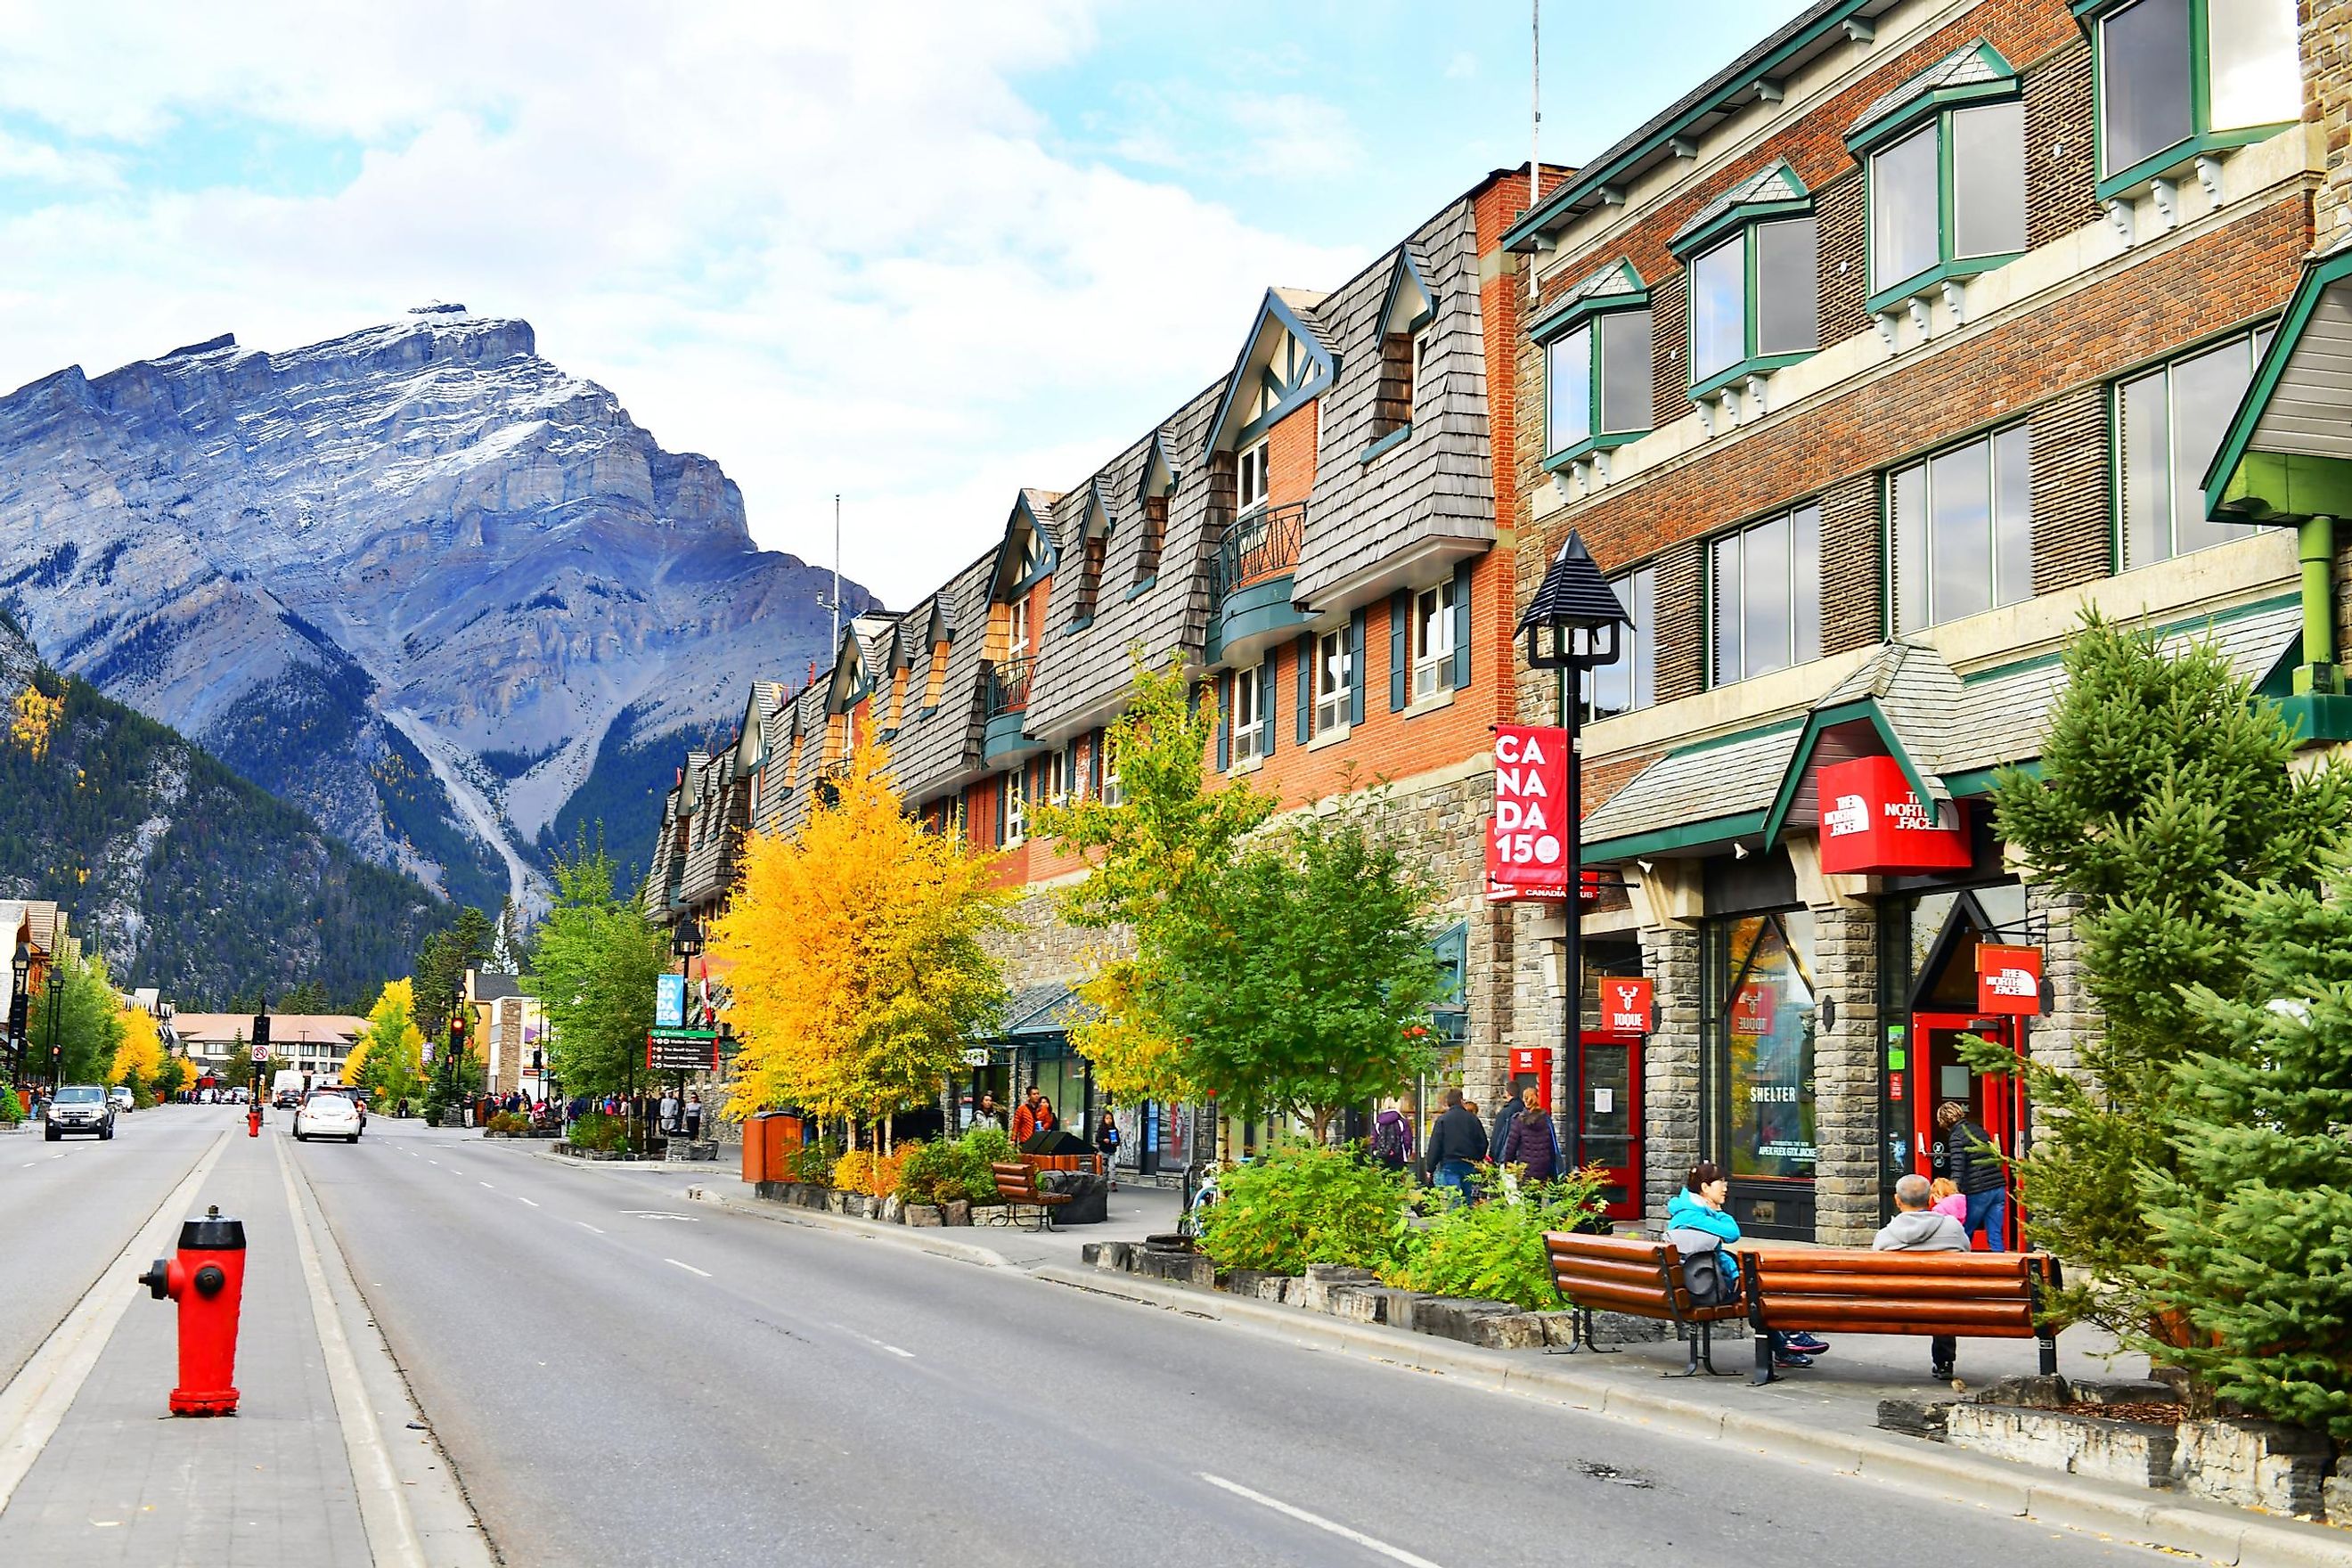 Street view of famous Banff Avenue in Banff National Park. Banff is a resort town and central shopping district of Alberta's most popular tourist destinations.